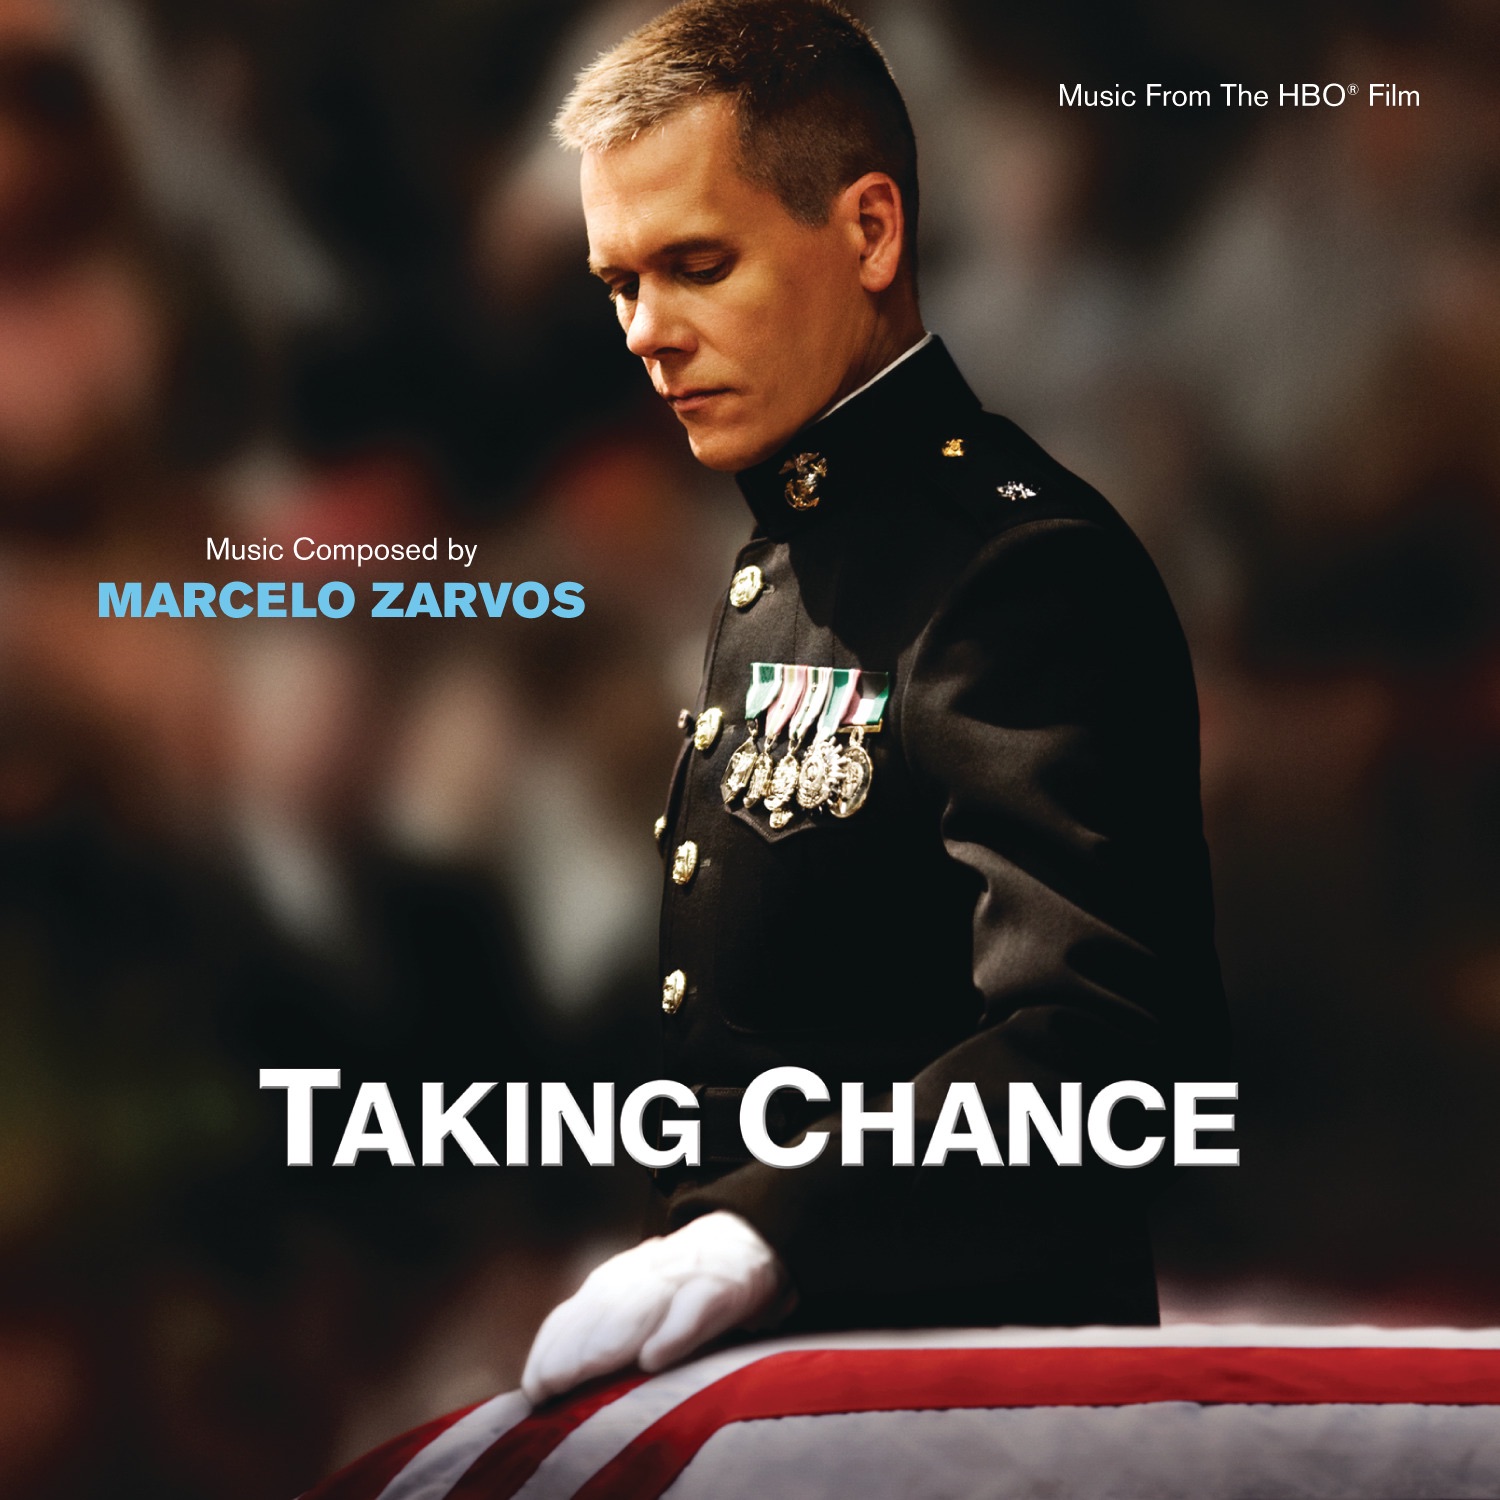 Fallen another. Taking chance (2009). Taking chances. Доброволец 2009. Taking chance poster.